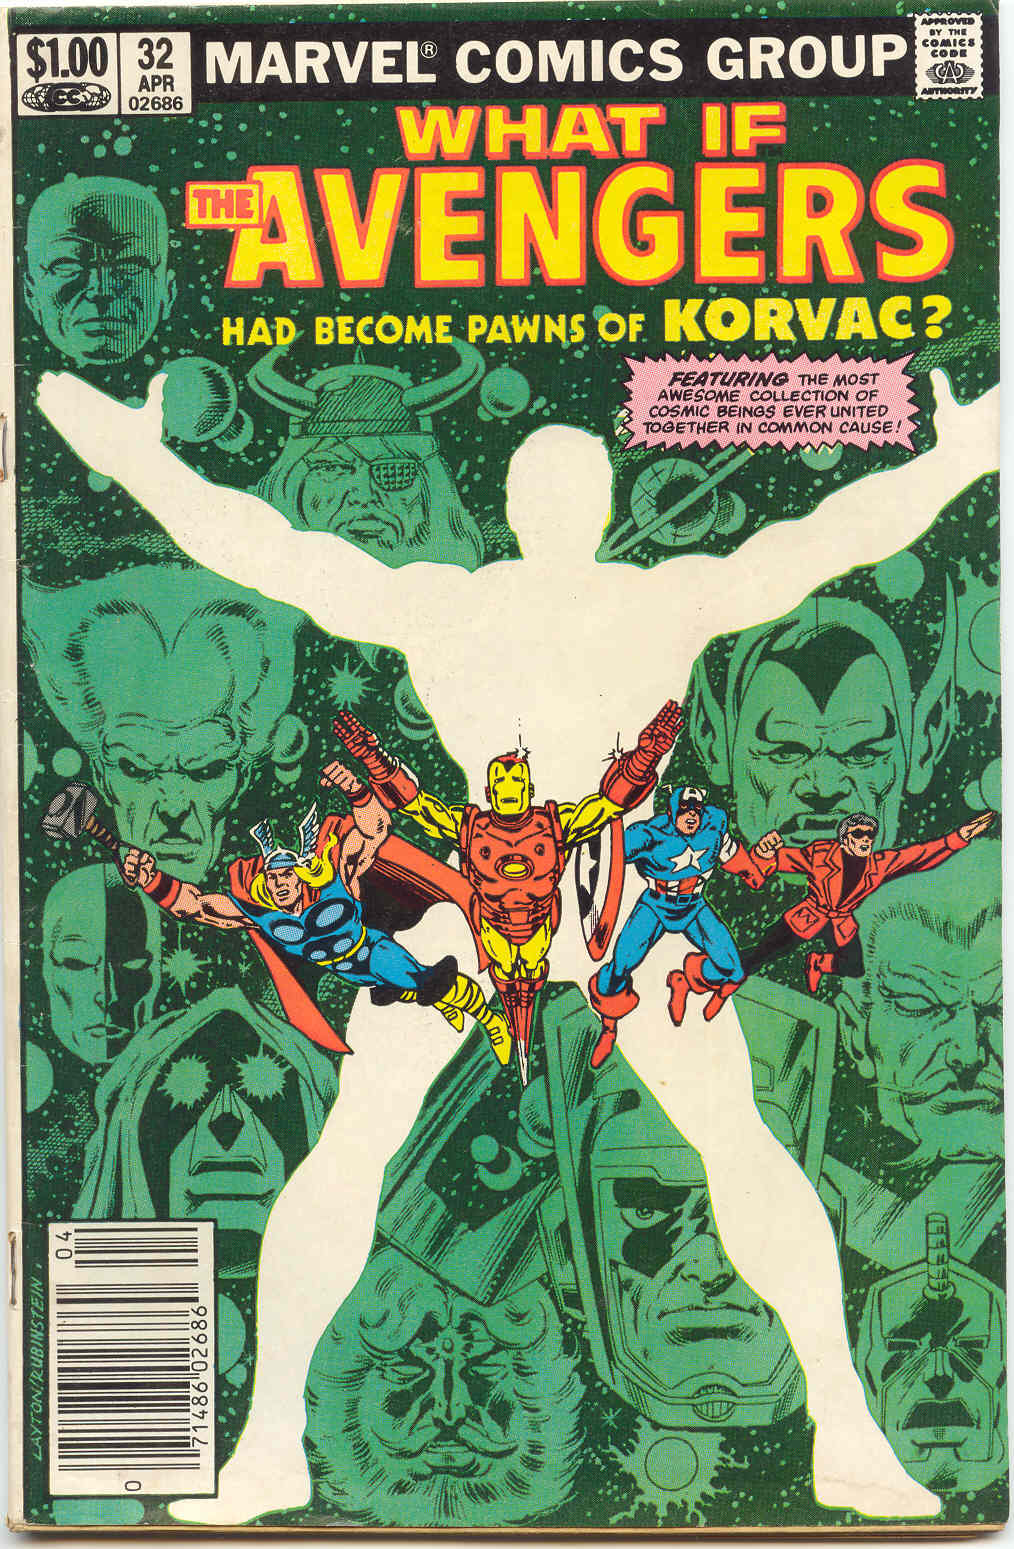 The Avengers had become pawn of Korvac